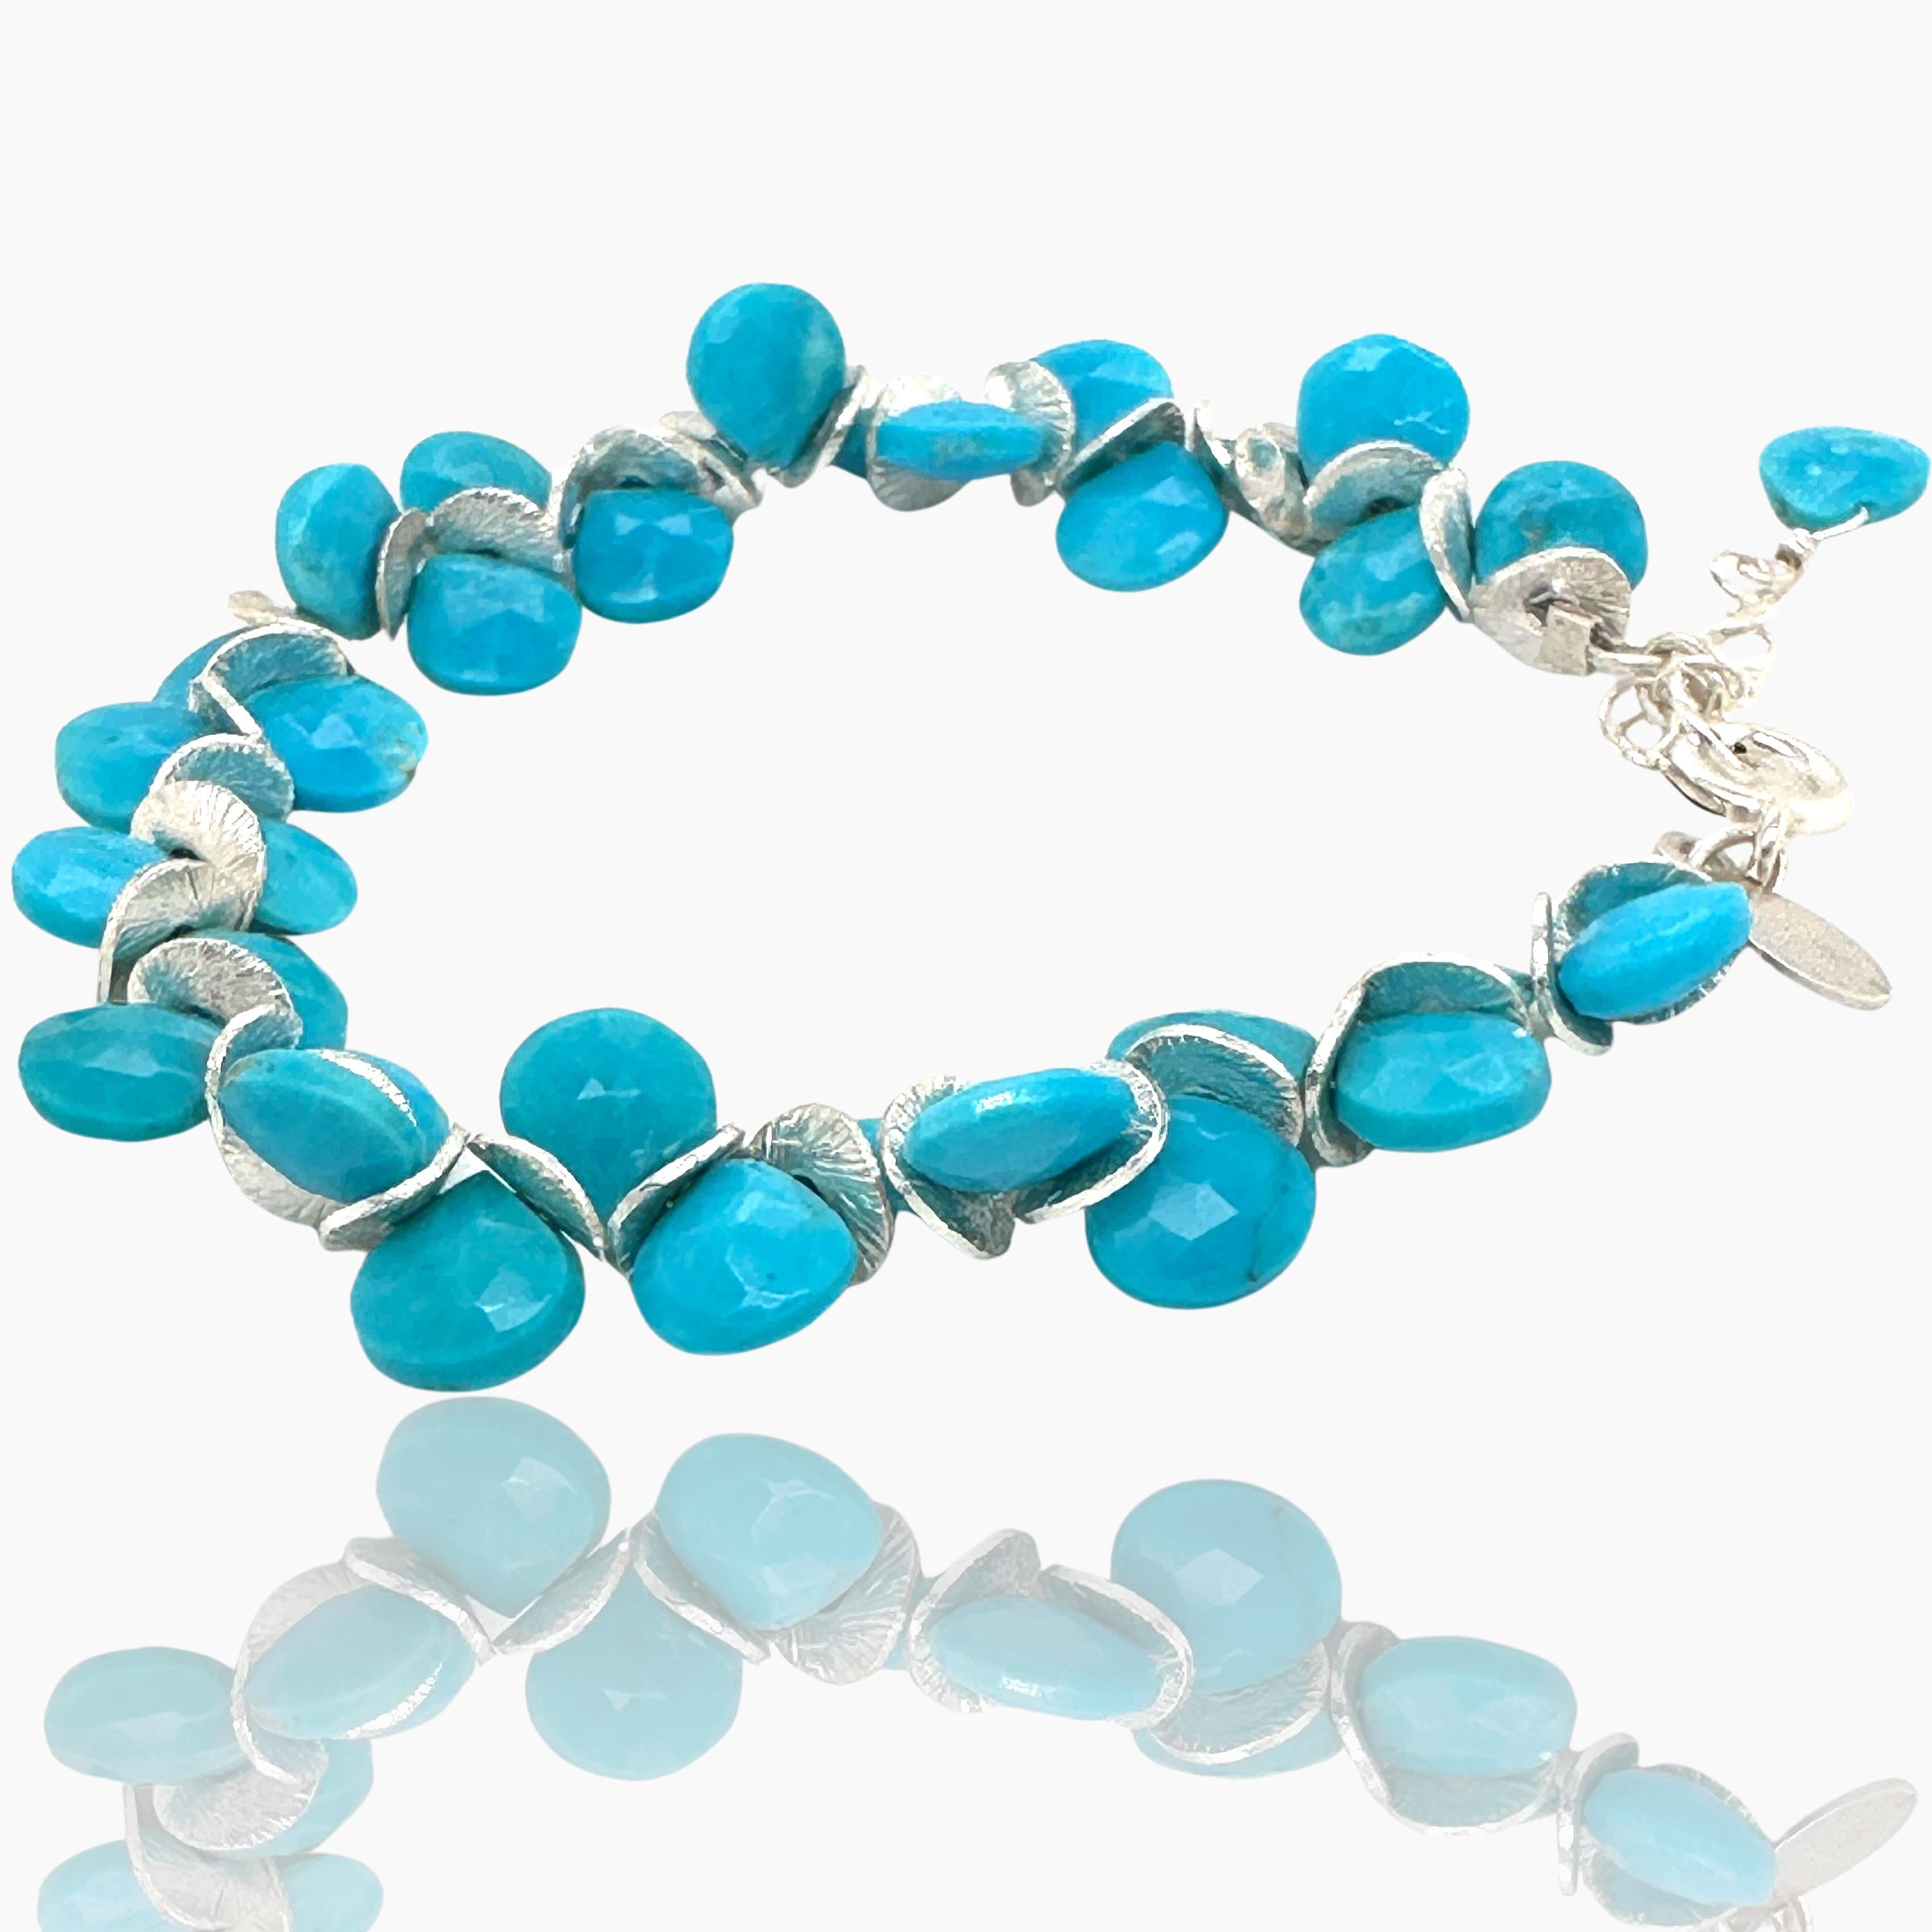 This limited edition bracelet features Sleeping Beauty Turquoise gems detailed with sterling silver discs and a sterling spring ring clasp. It is crafted using stones from the now-closed Sleeping Beauty mine in Arizona.

Available in Small (6-7